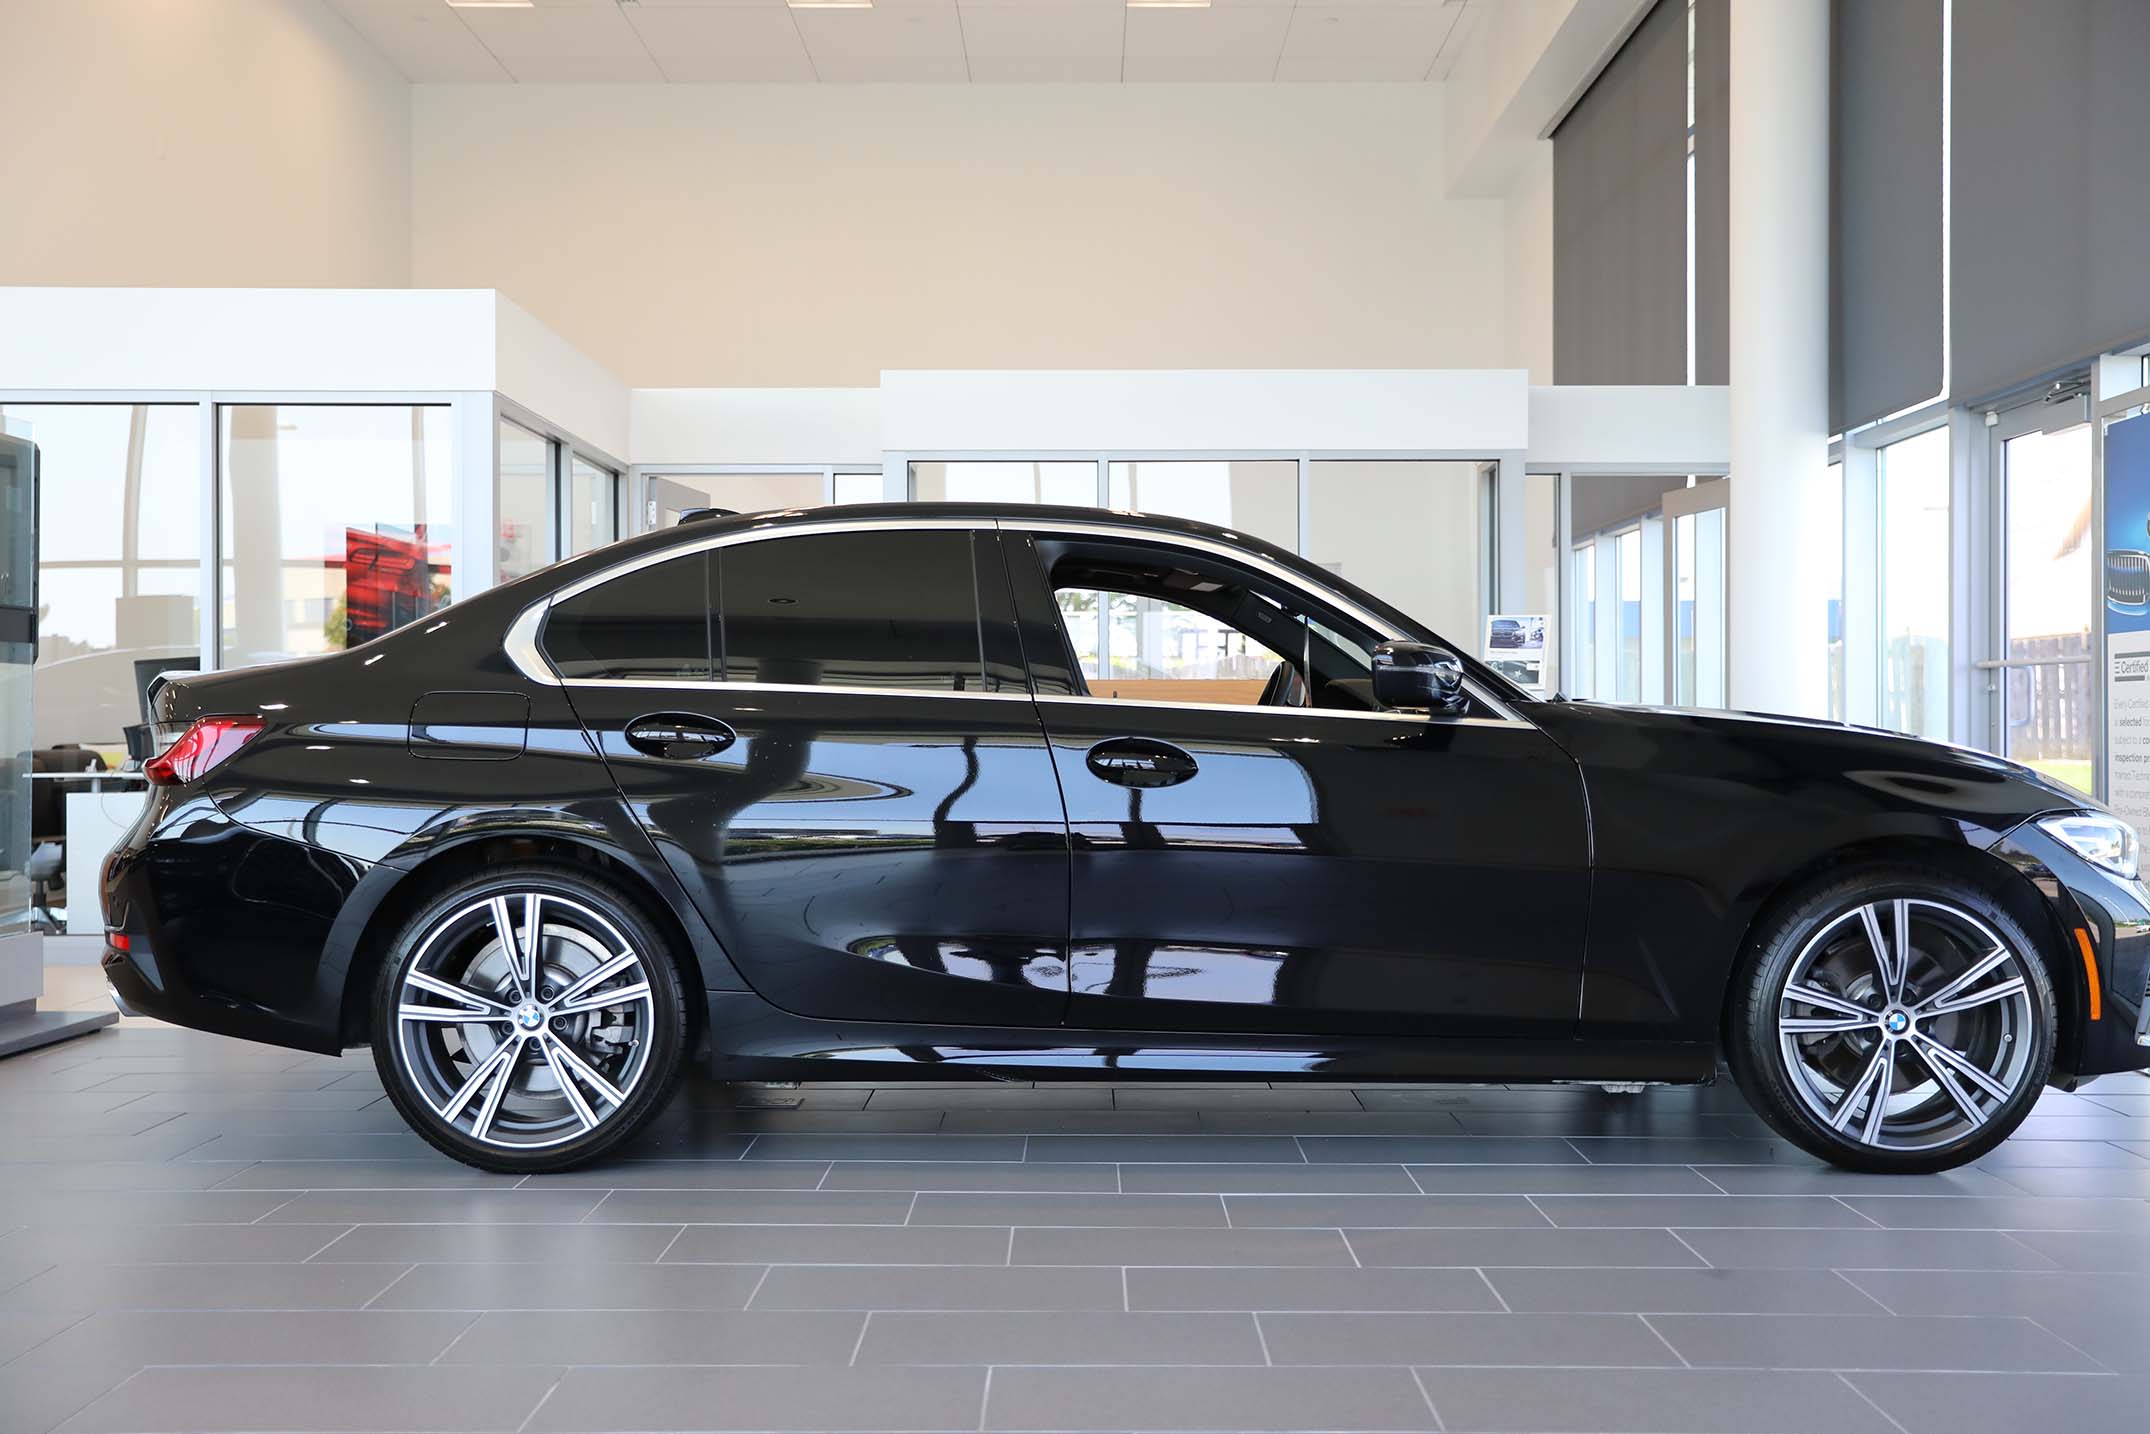 BMW of Dayton, your certified pre-owned destination.